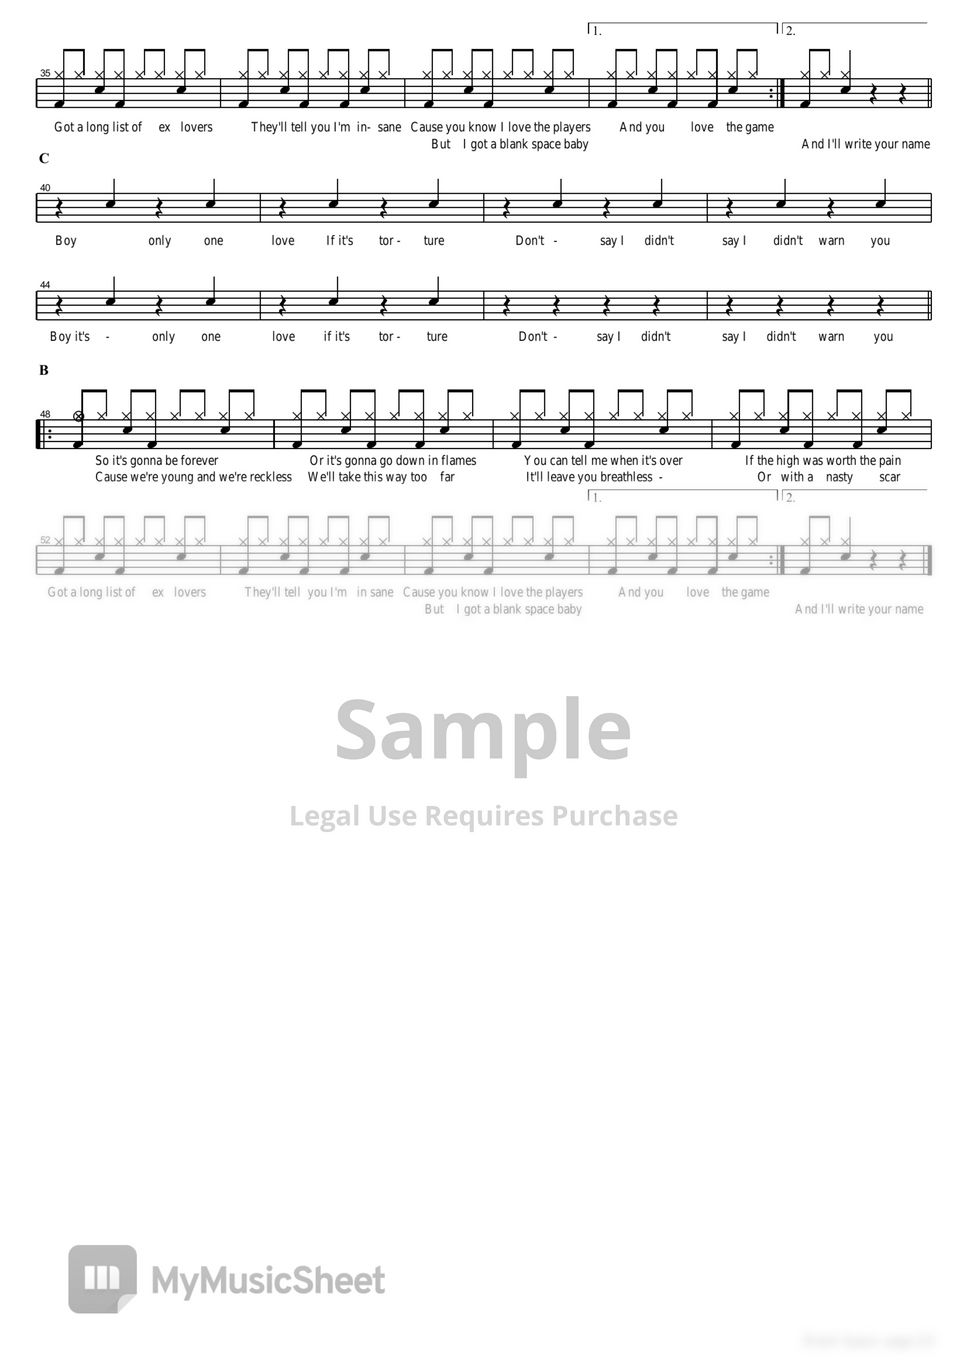 Taylor Swift - Blank Space by COPYDRUM